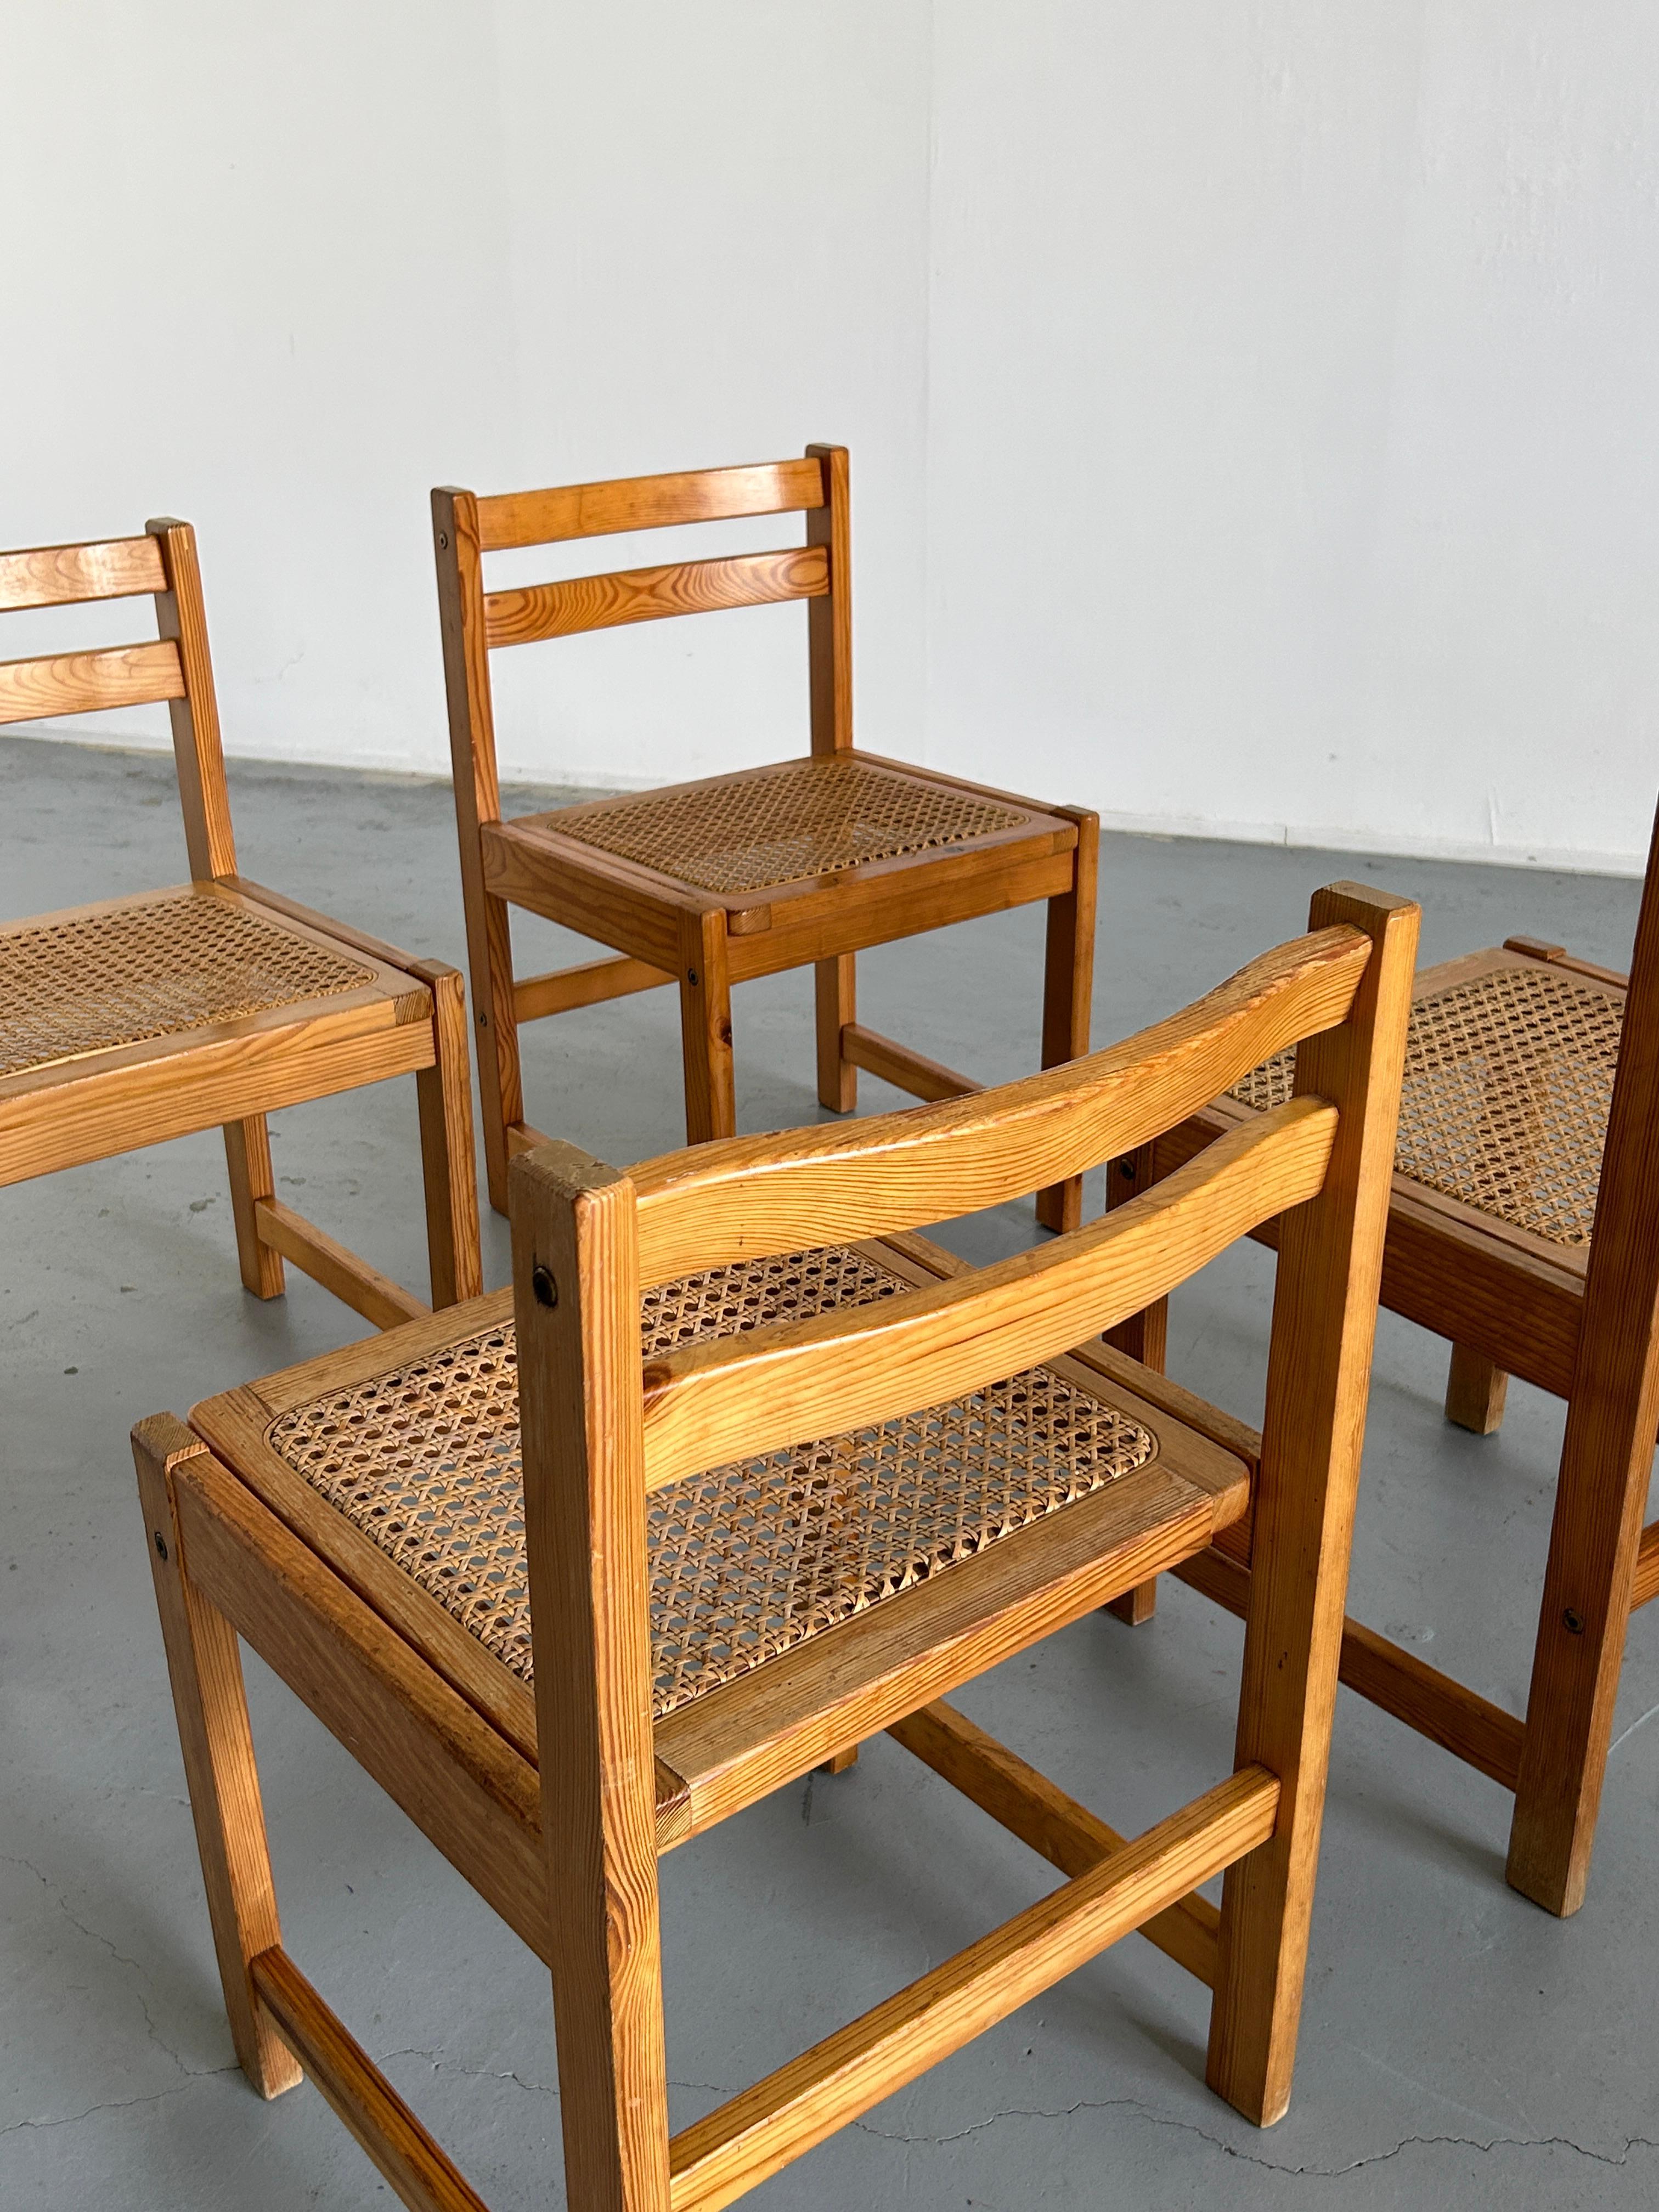 Set of 4 Vintage Mid-Century Modern Wooden Dining Chairs in Beech and Cane, 60s 8